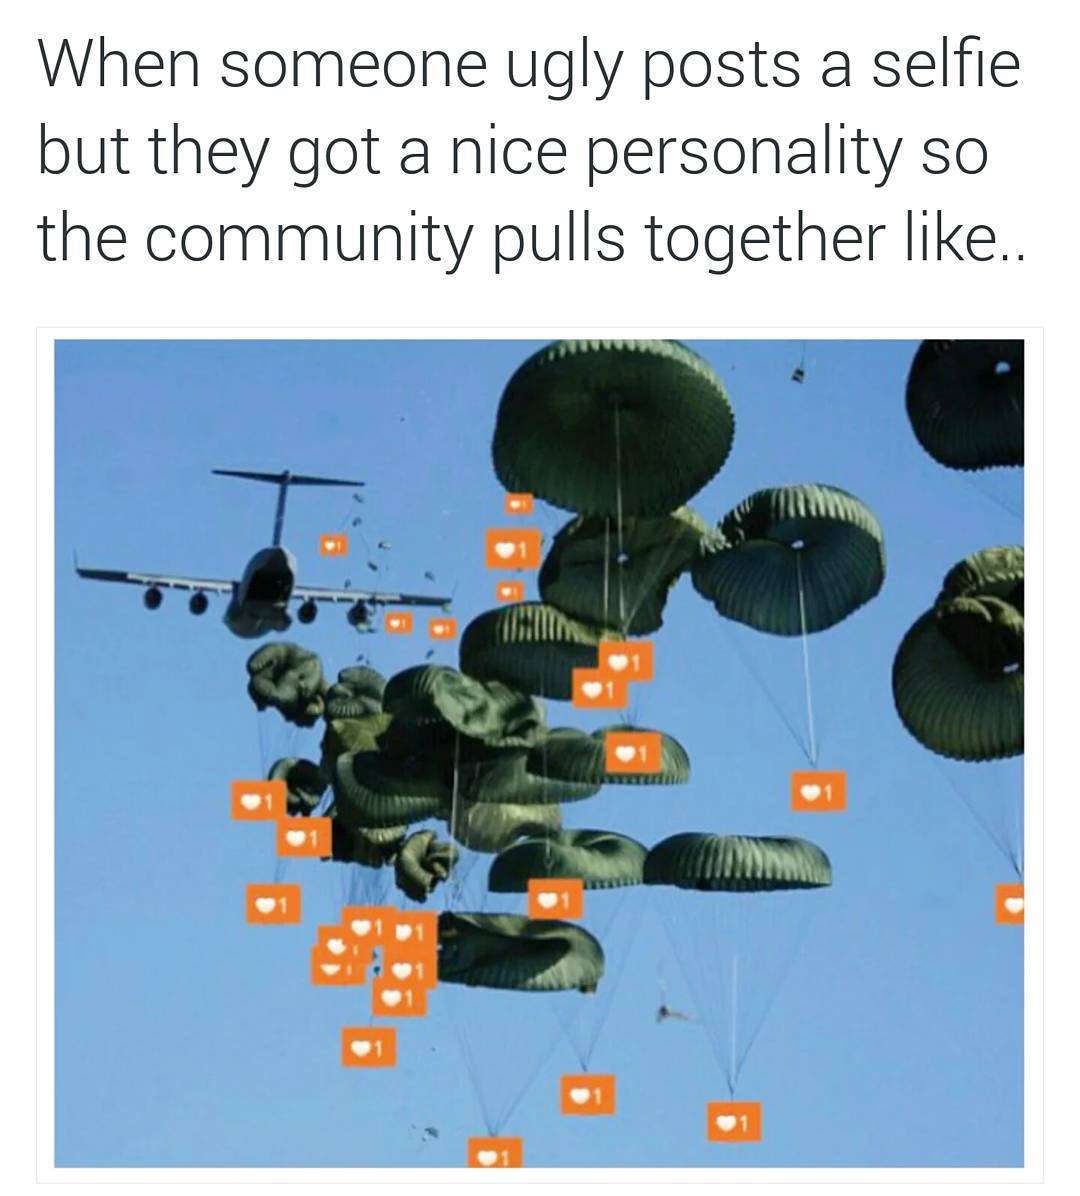 c 17 airdrop - When someone ugly posts a selfie but they got a nice personality so the community pulls together .. 1